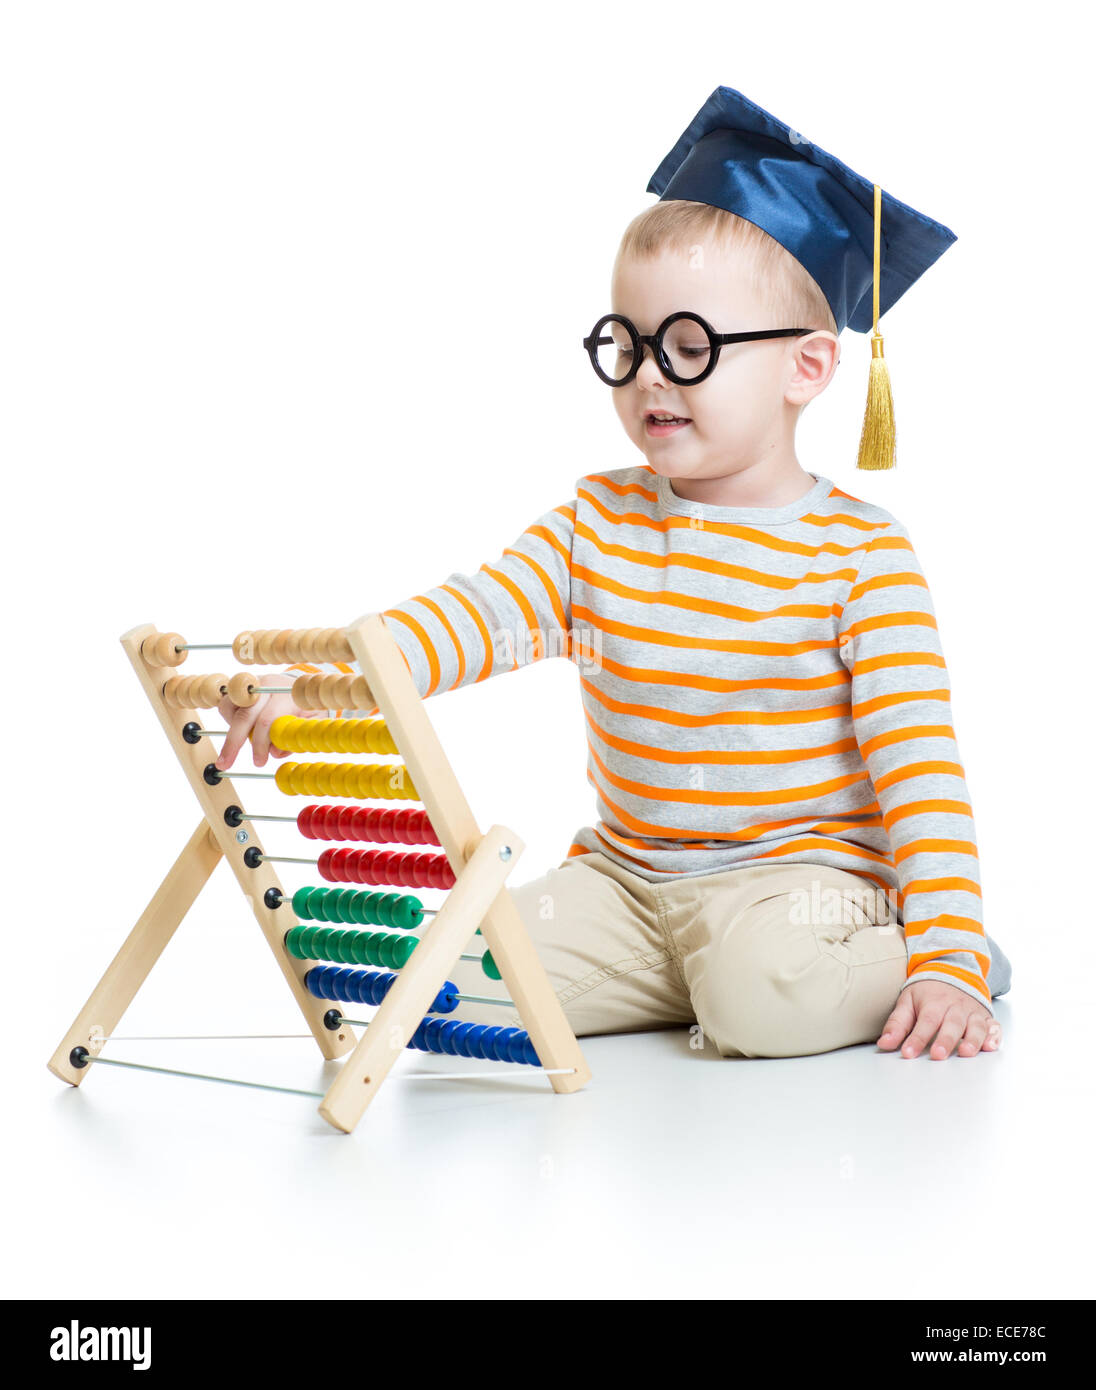 Kid in graduation cap and glasses with colorful abacus isolated on white Stock Photo